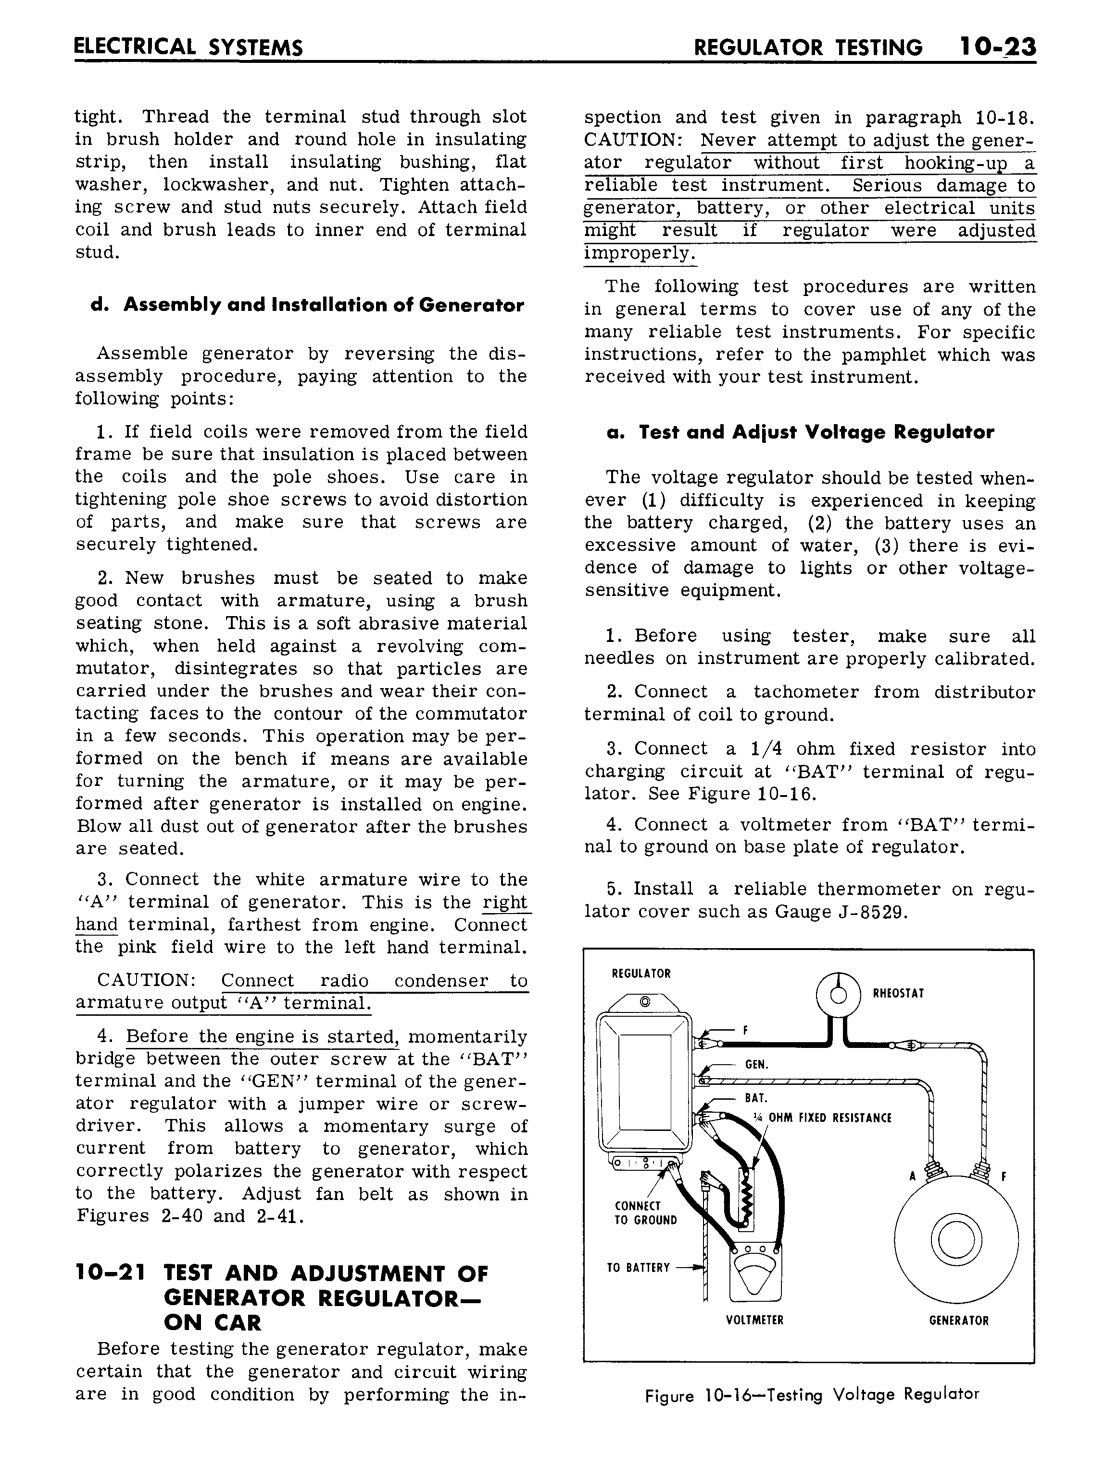 n_10 1961 Buick Shop Manual - Electrical Systems-023-023.jpg